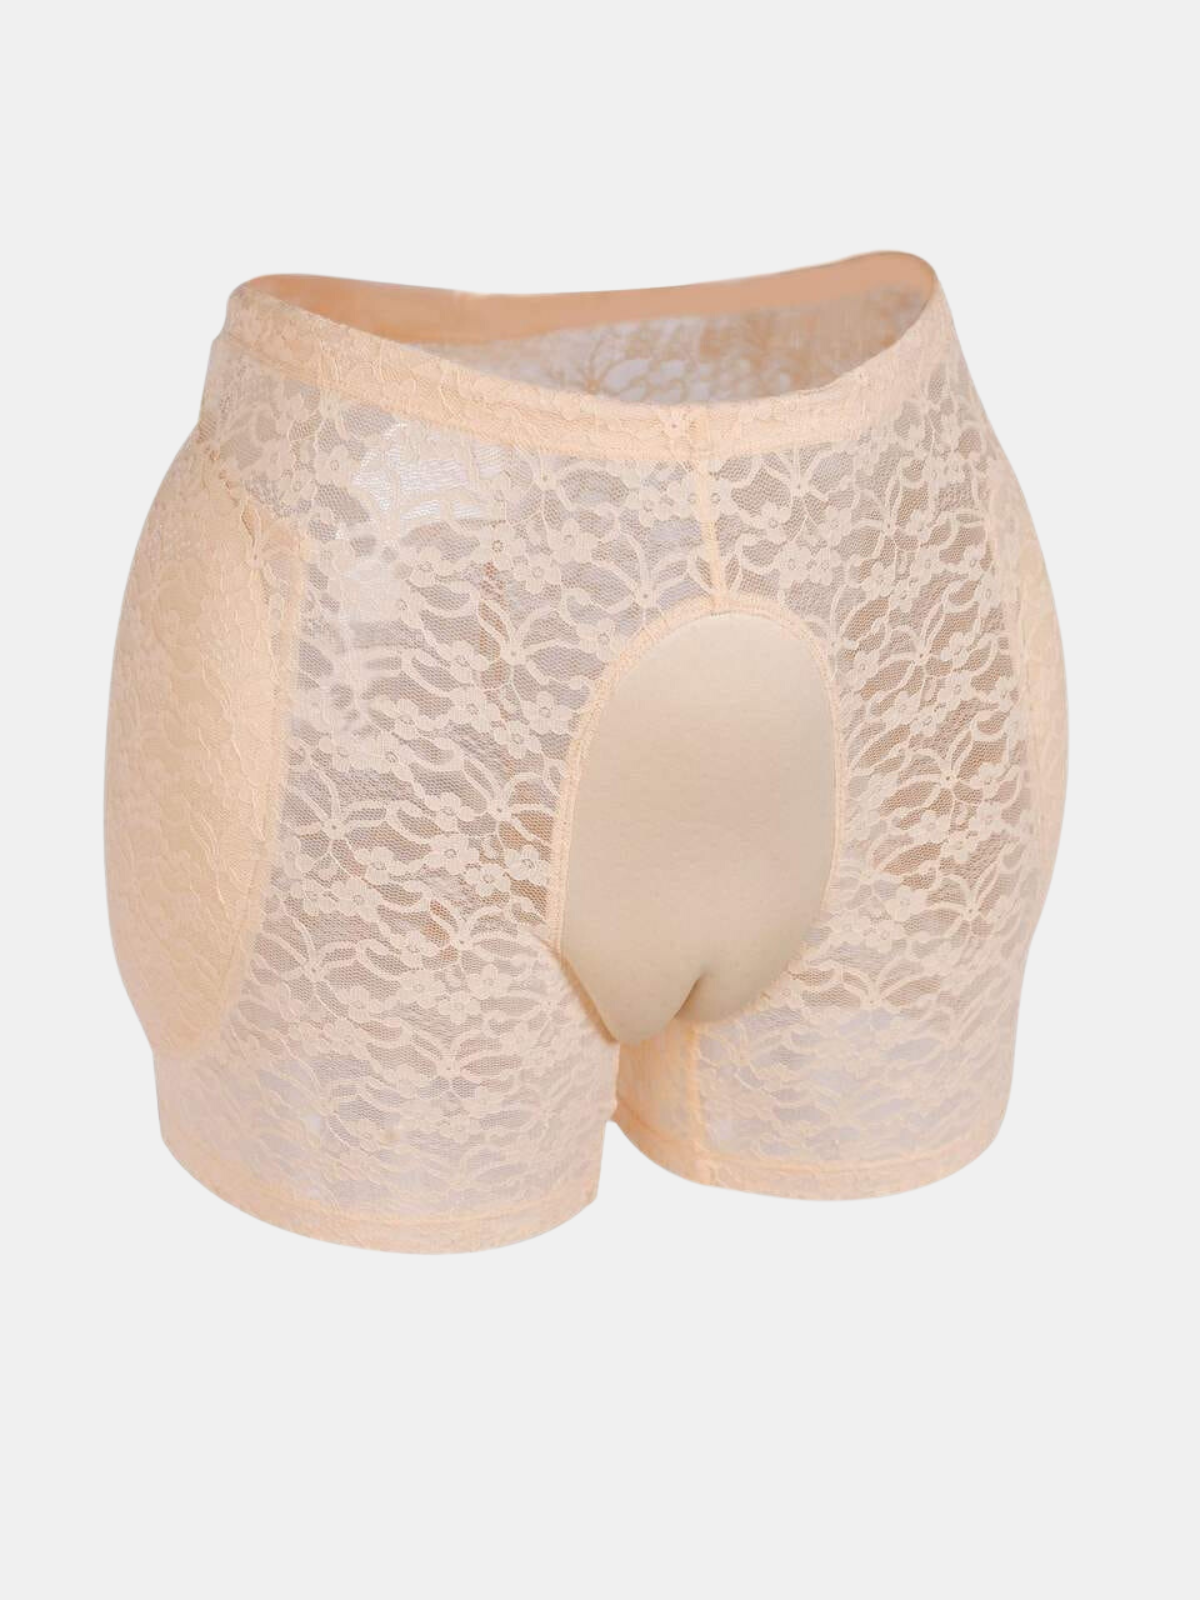 Everything you need to know about our Cameltoe Proof Undies